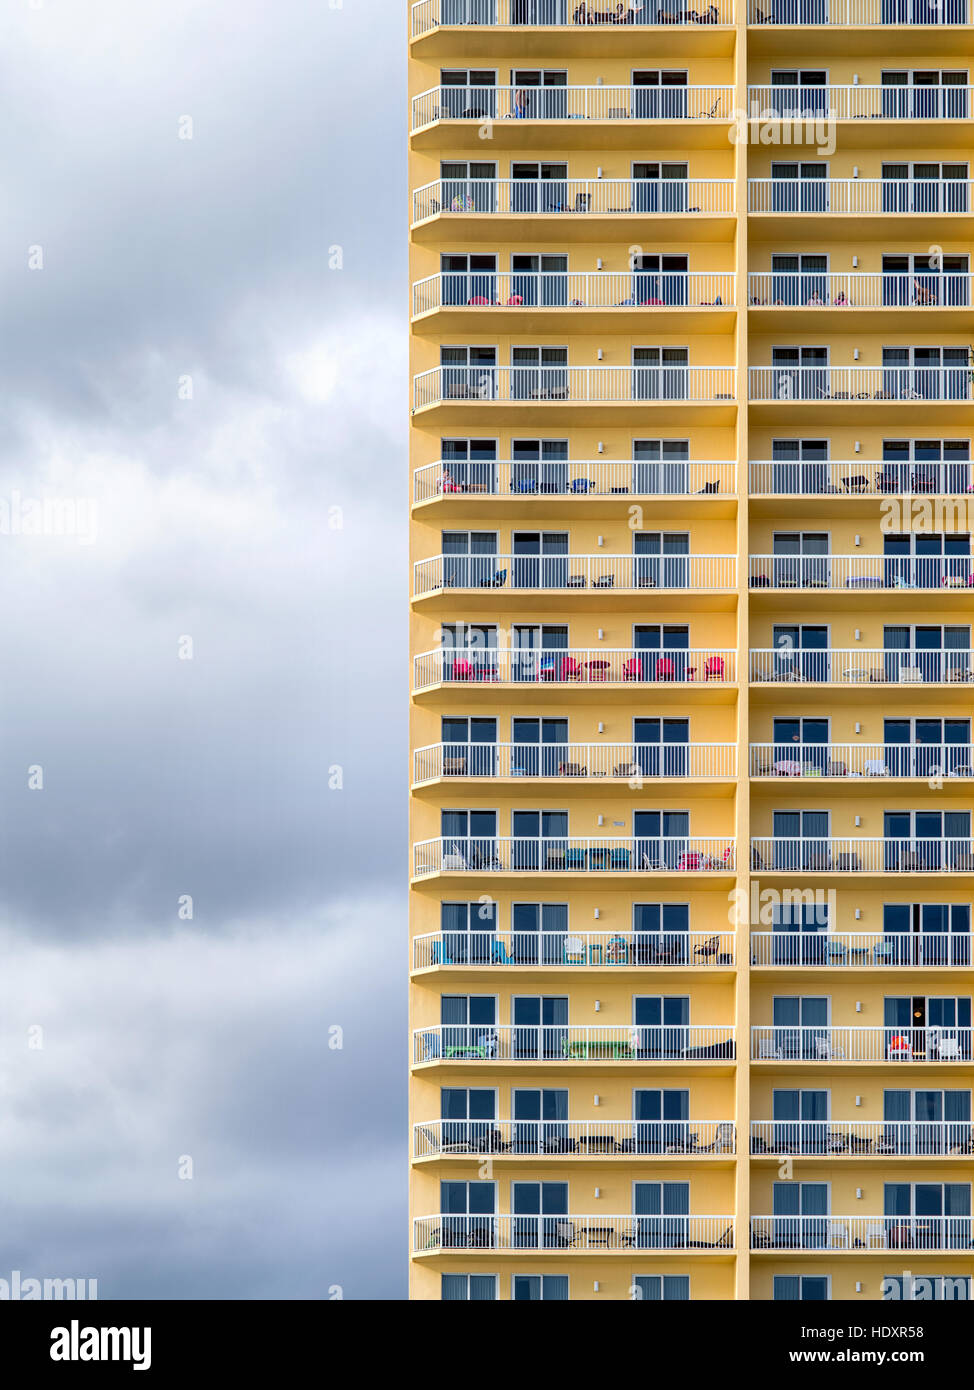 A pattern of bright, yellow condominium balconies against a gray cloudy sky. Stock Photo